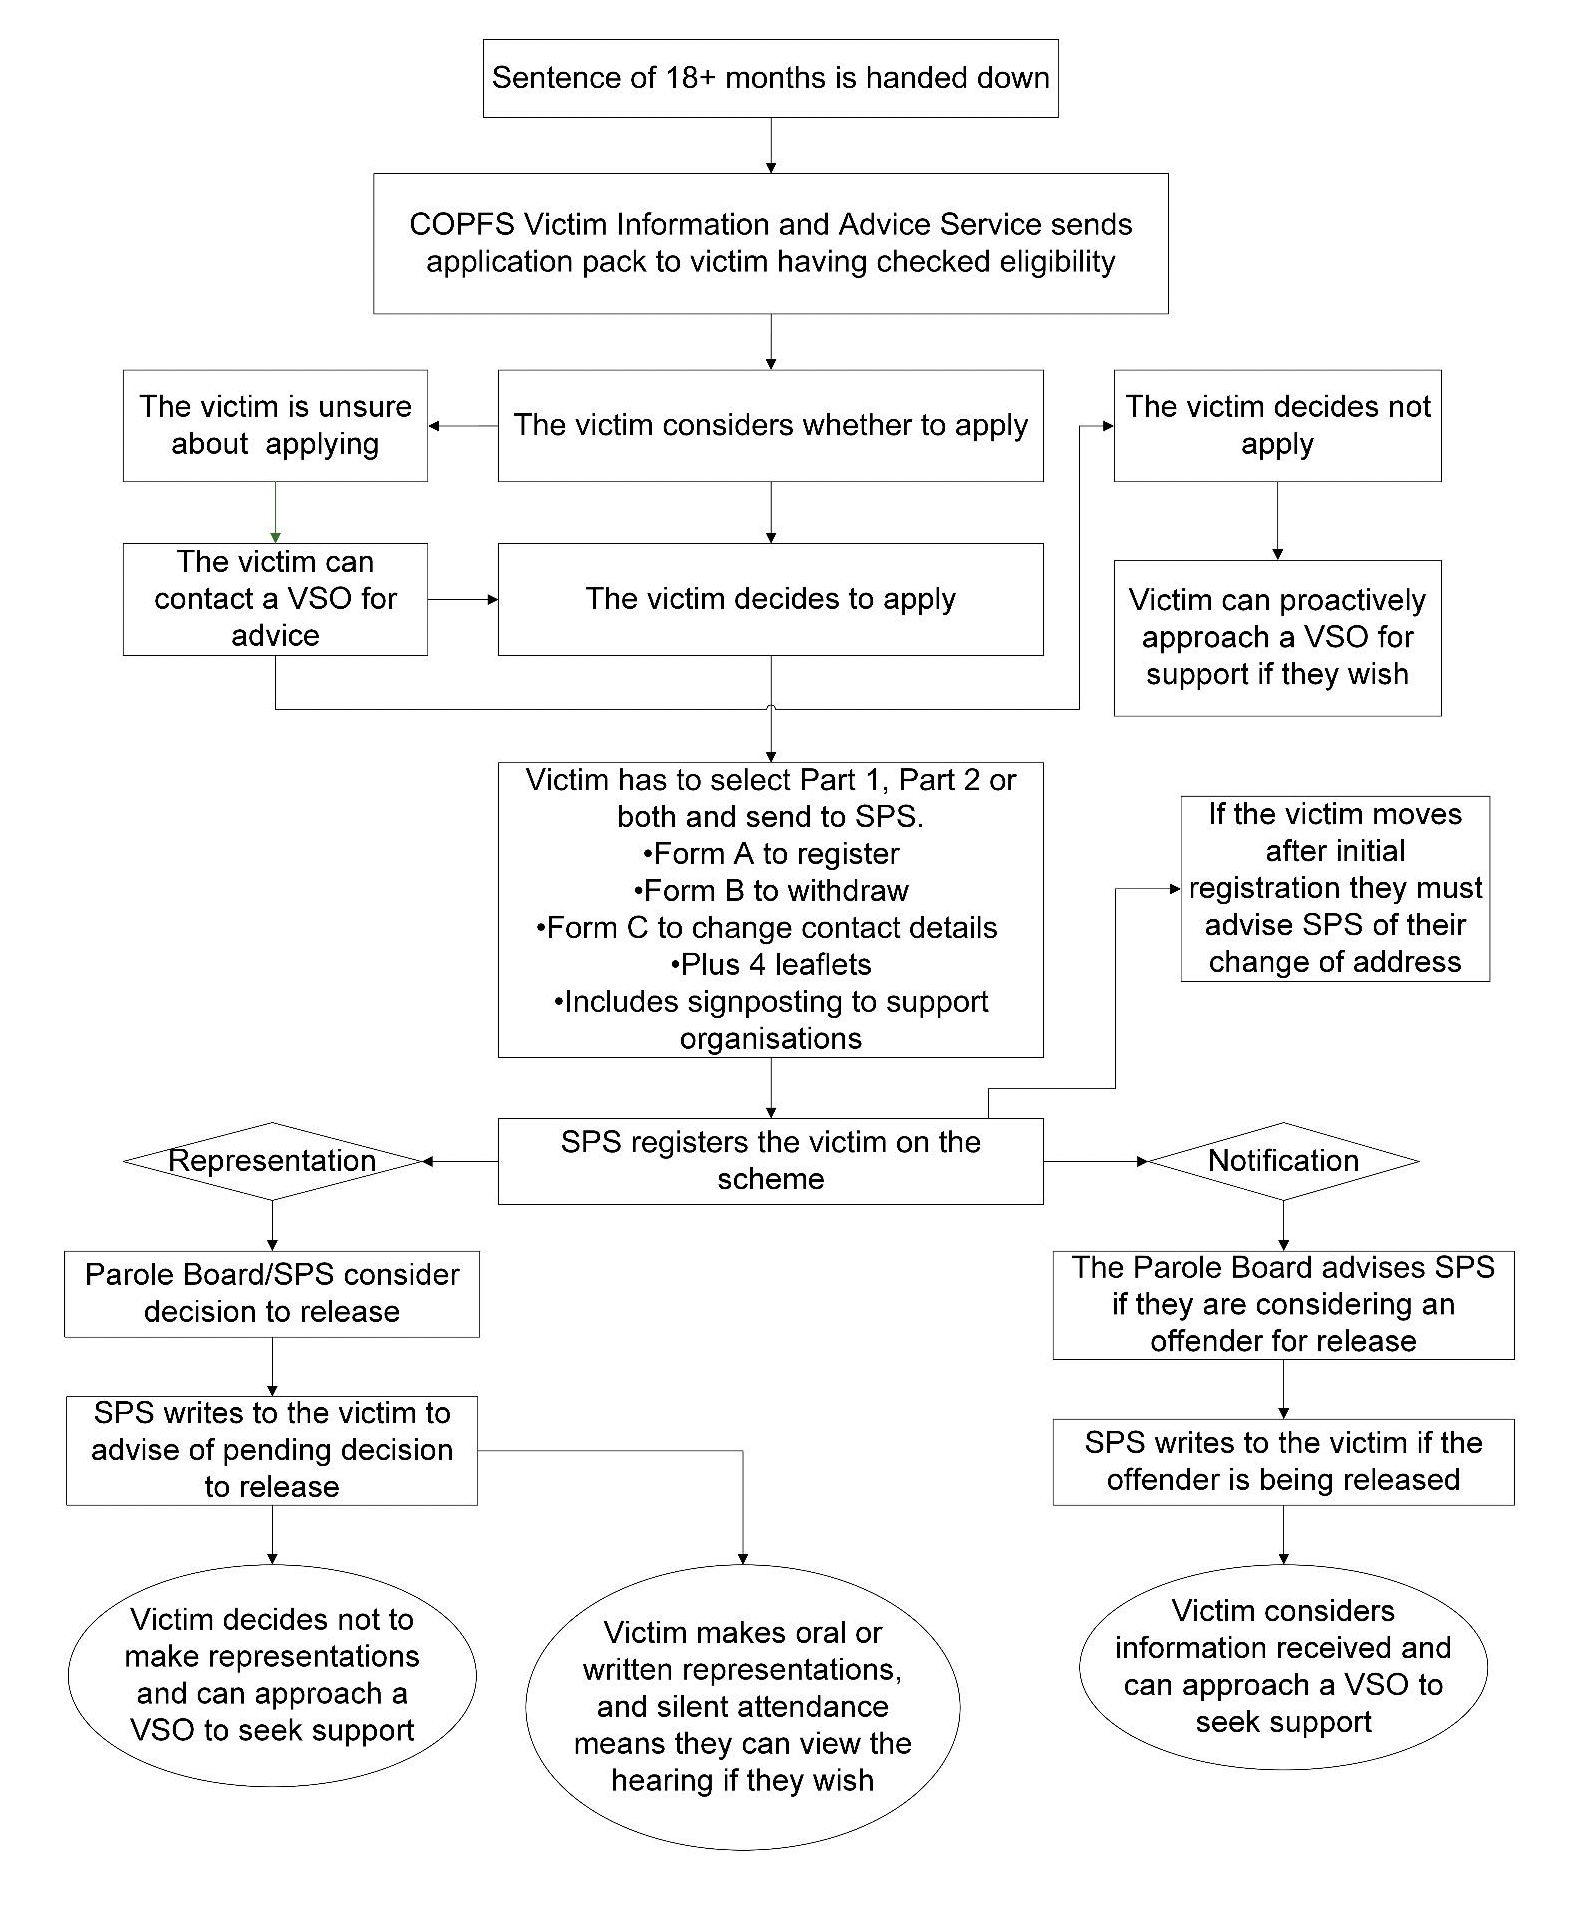 This is a process map for current victim notification where an offender has been sentenced to more than 18 months in prison. 
The COPFS Victim Information and Advice Service will send an application form to eligible victims. If the victim is not sure about applying, they can contact a VSO for support. They can also contact a VSO for support if they decide not to apply. 
If the victim decides to apply, they decide if they want to receive information (Part 1 of the VNS) and/or make representations (Part 2 of the VNS). They send the appropriate forms to SPS, who registers them on the scheme. If the victim moves, they need to tell SPS their new address. 
For Part 1 of the VNS (notification), the Parole Board will advise SPS if they are considering the release of an offender. SPS will write to the victim if the offender is being released. The victim can consider the information and approach a VSO for support if they want to. 
For Part 2 of the VNS (representations) the Parole Board or SPS consider the decision to release. SPS will write to the victim to let them know of the pending decision to release. If the victim decides not to make representations, they can approach a VSO to ask for support. 
If the victim wants to make representations, they can do so orally or in writing. Silent attendance means the victim can view the hearing if they want to.
